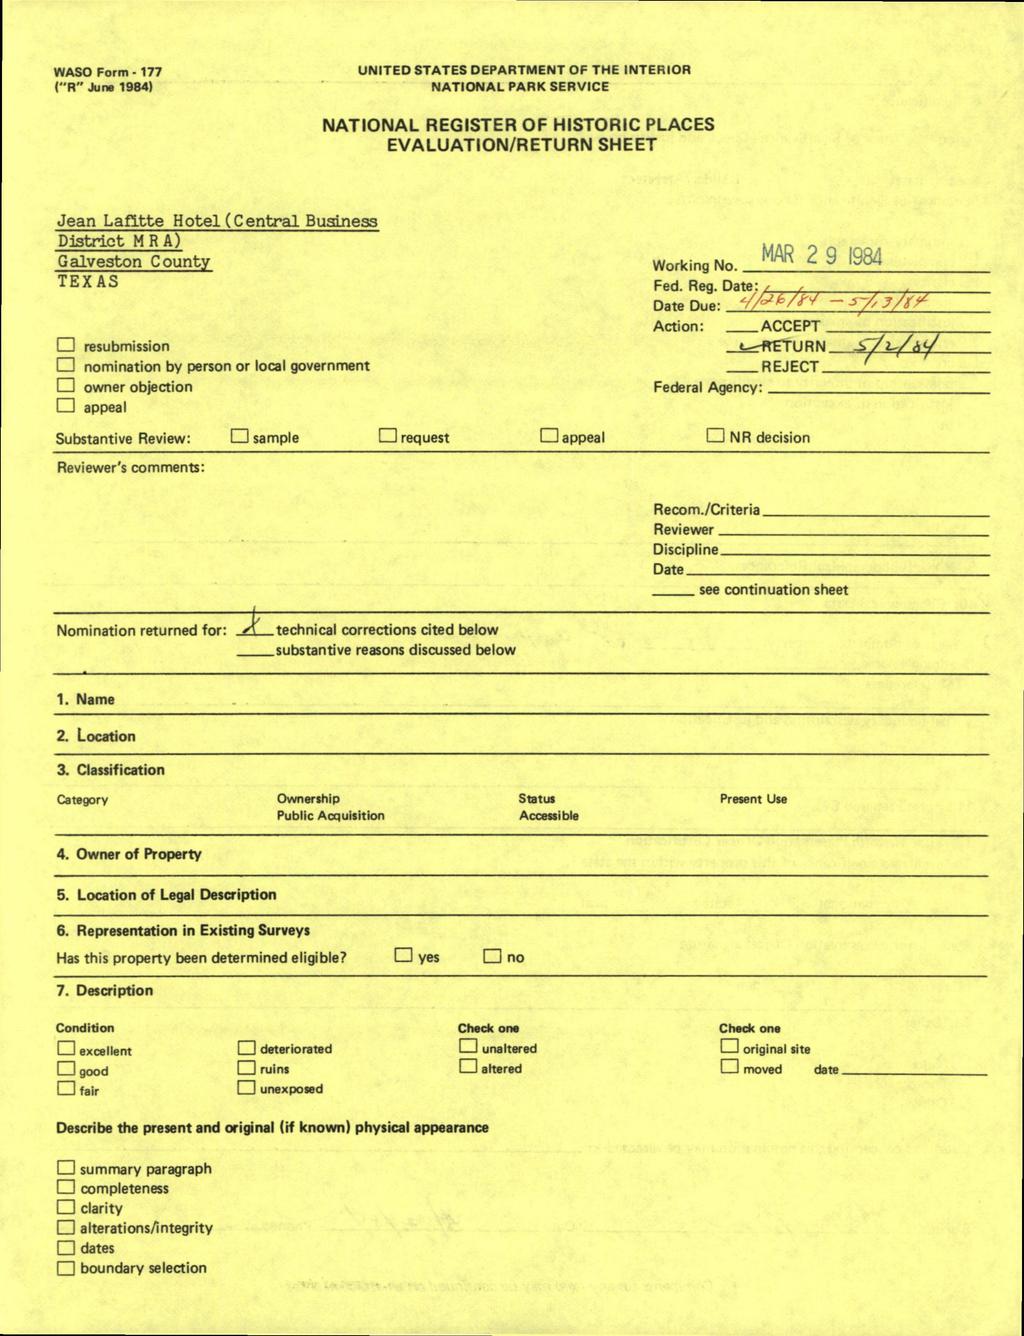 WASO Form - 177 ("R" June 1984) UNITED STATES DEPARTMENT OF THE INTERIOR NATIONAL PARK SERVICE NATIONAL REGISTER OF HISTORIC PLACES EVALUATION/RETURN SHEET Jean Lafitte Hotel (Central Business